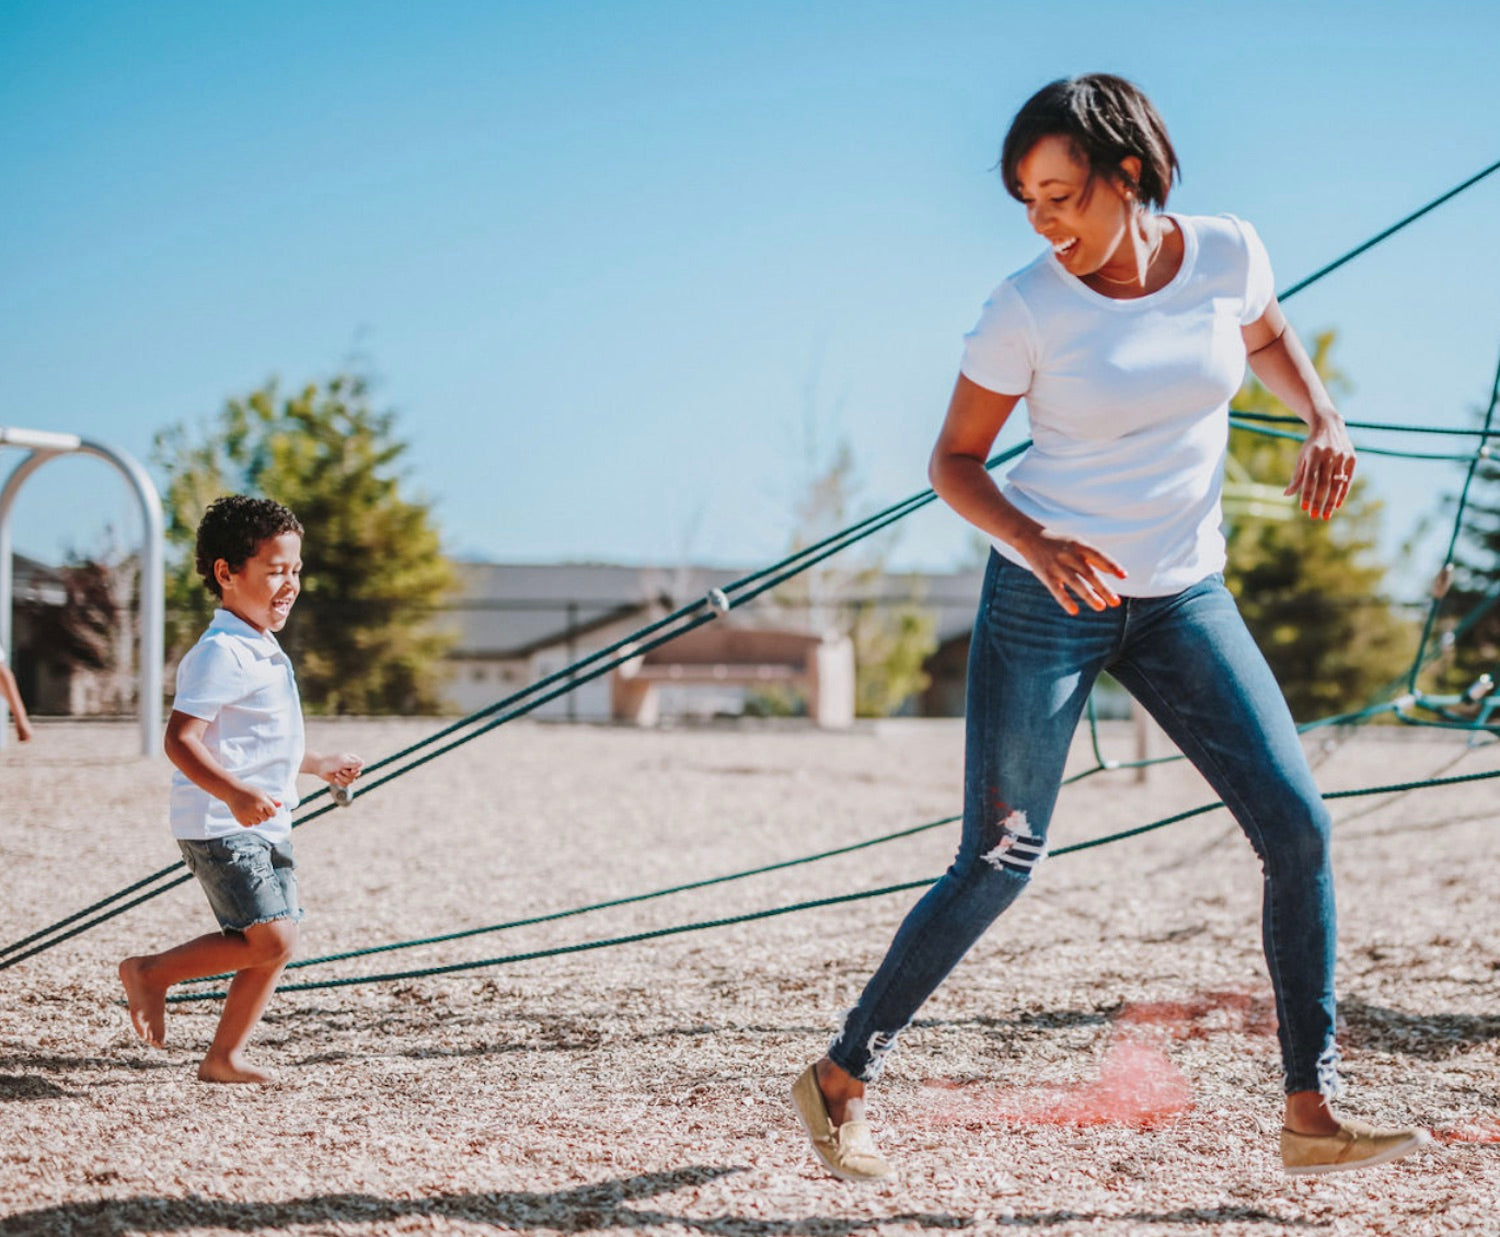 10 Things to Do Before School Starts (For Families). Mother and son playing in a outdoor obstacle course.